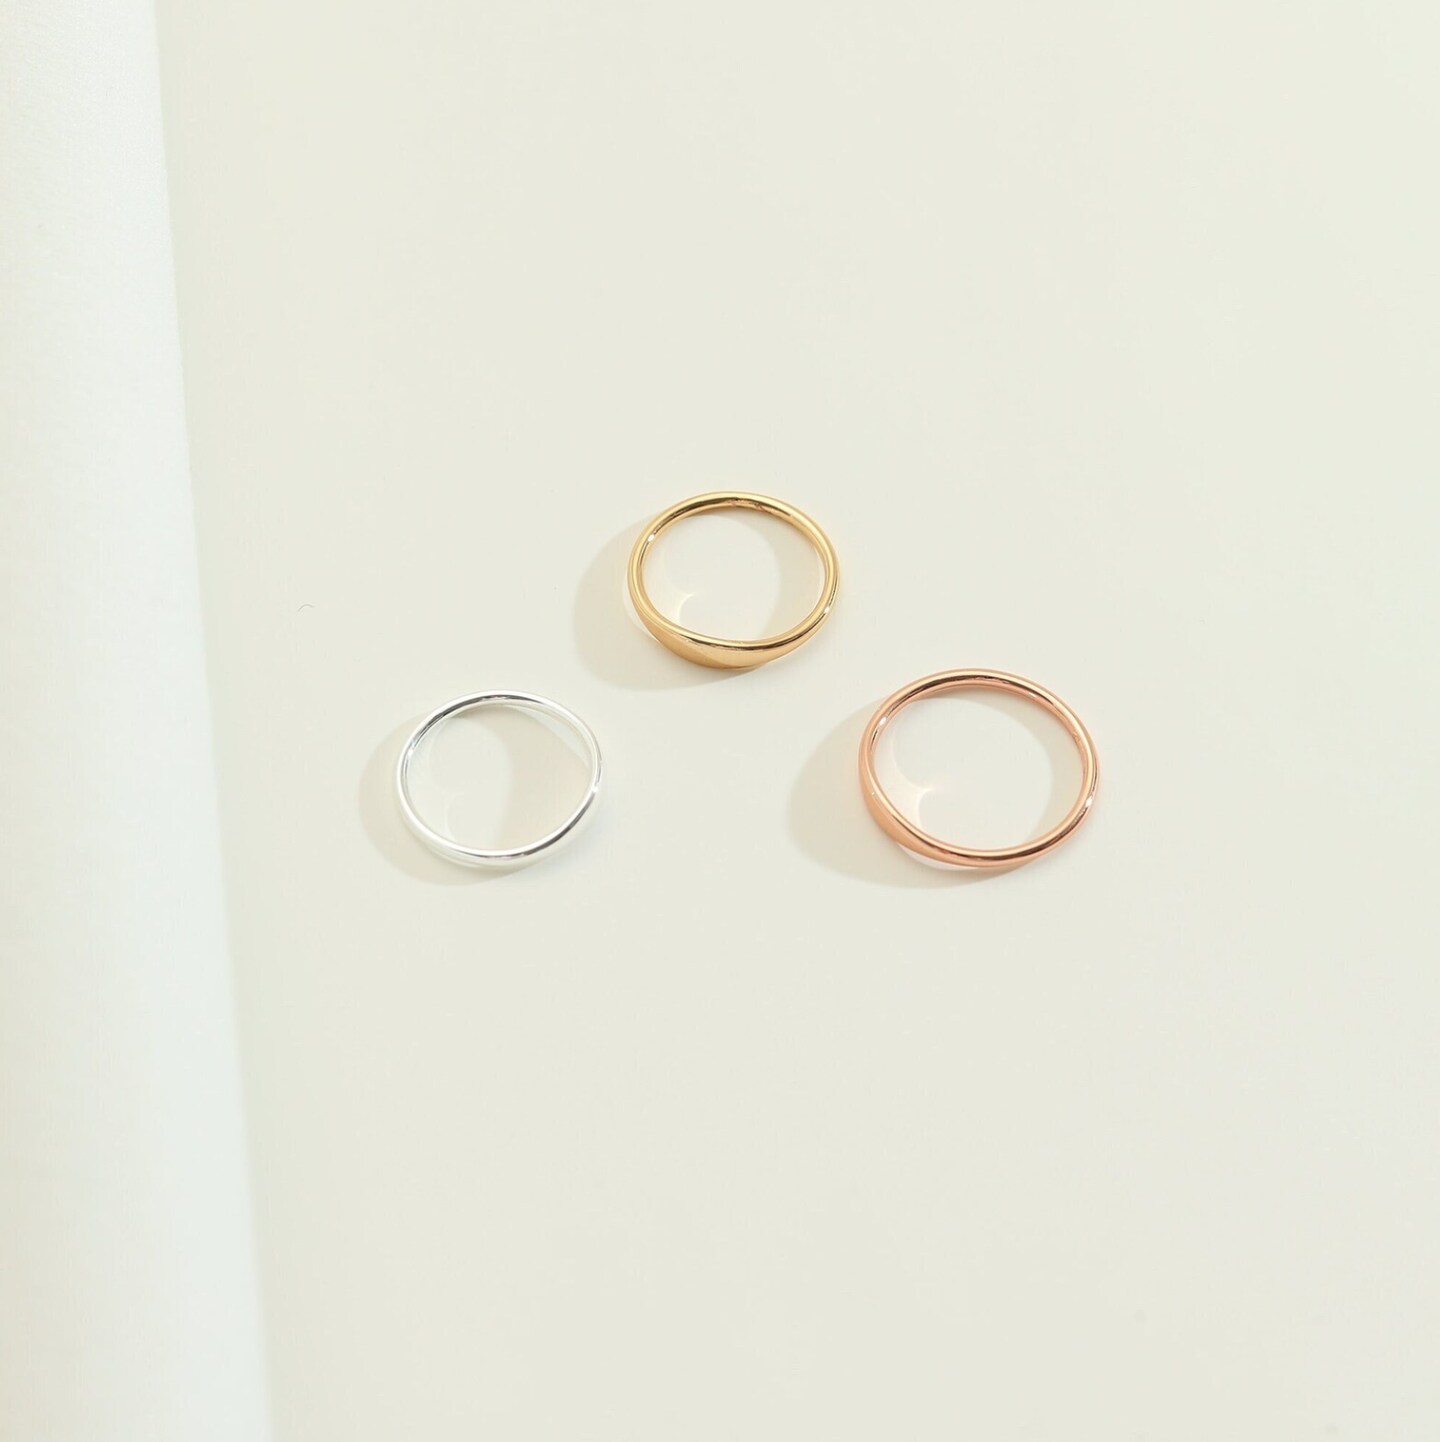 Mothers Ring Set -3 Stone rings plus 2 stacking rings | Flickr